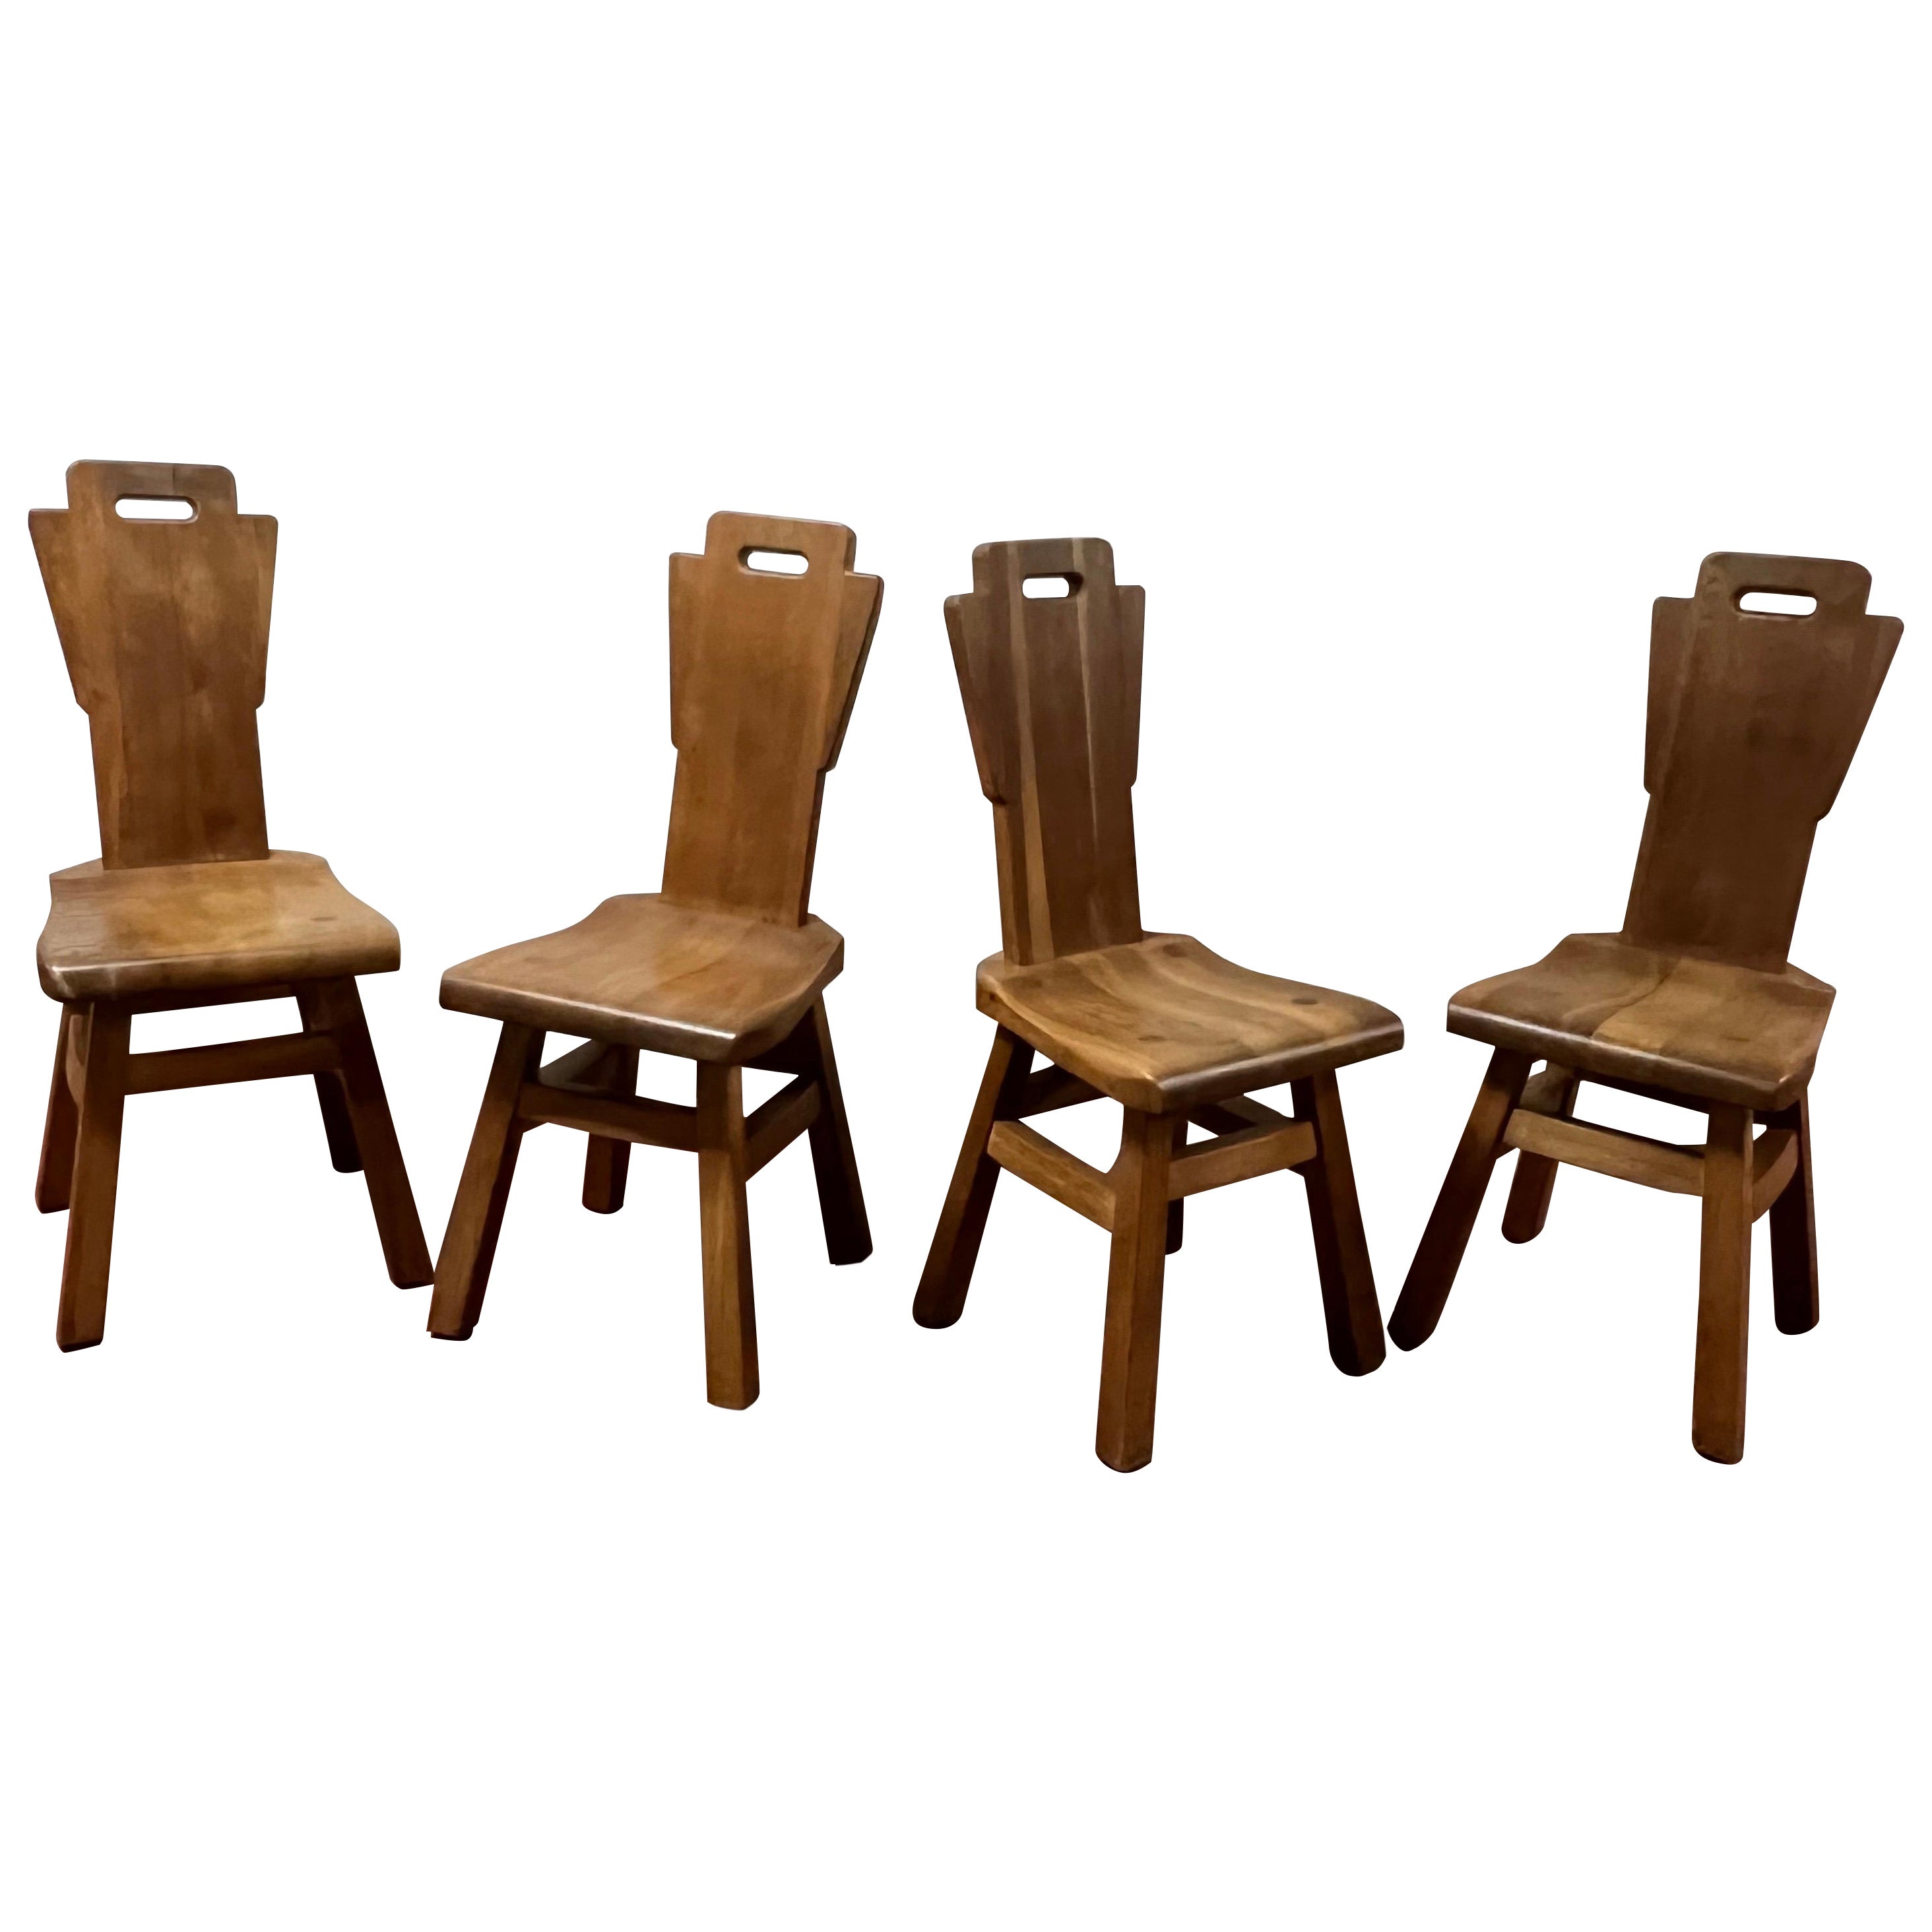 Set of 4 Oak Brutalist Chairs For Sale